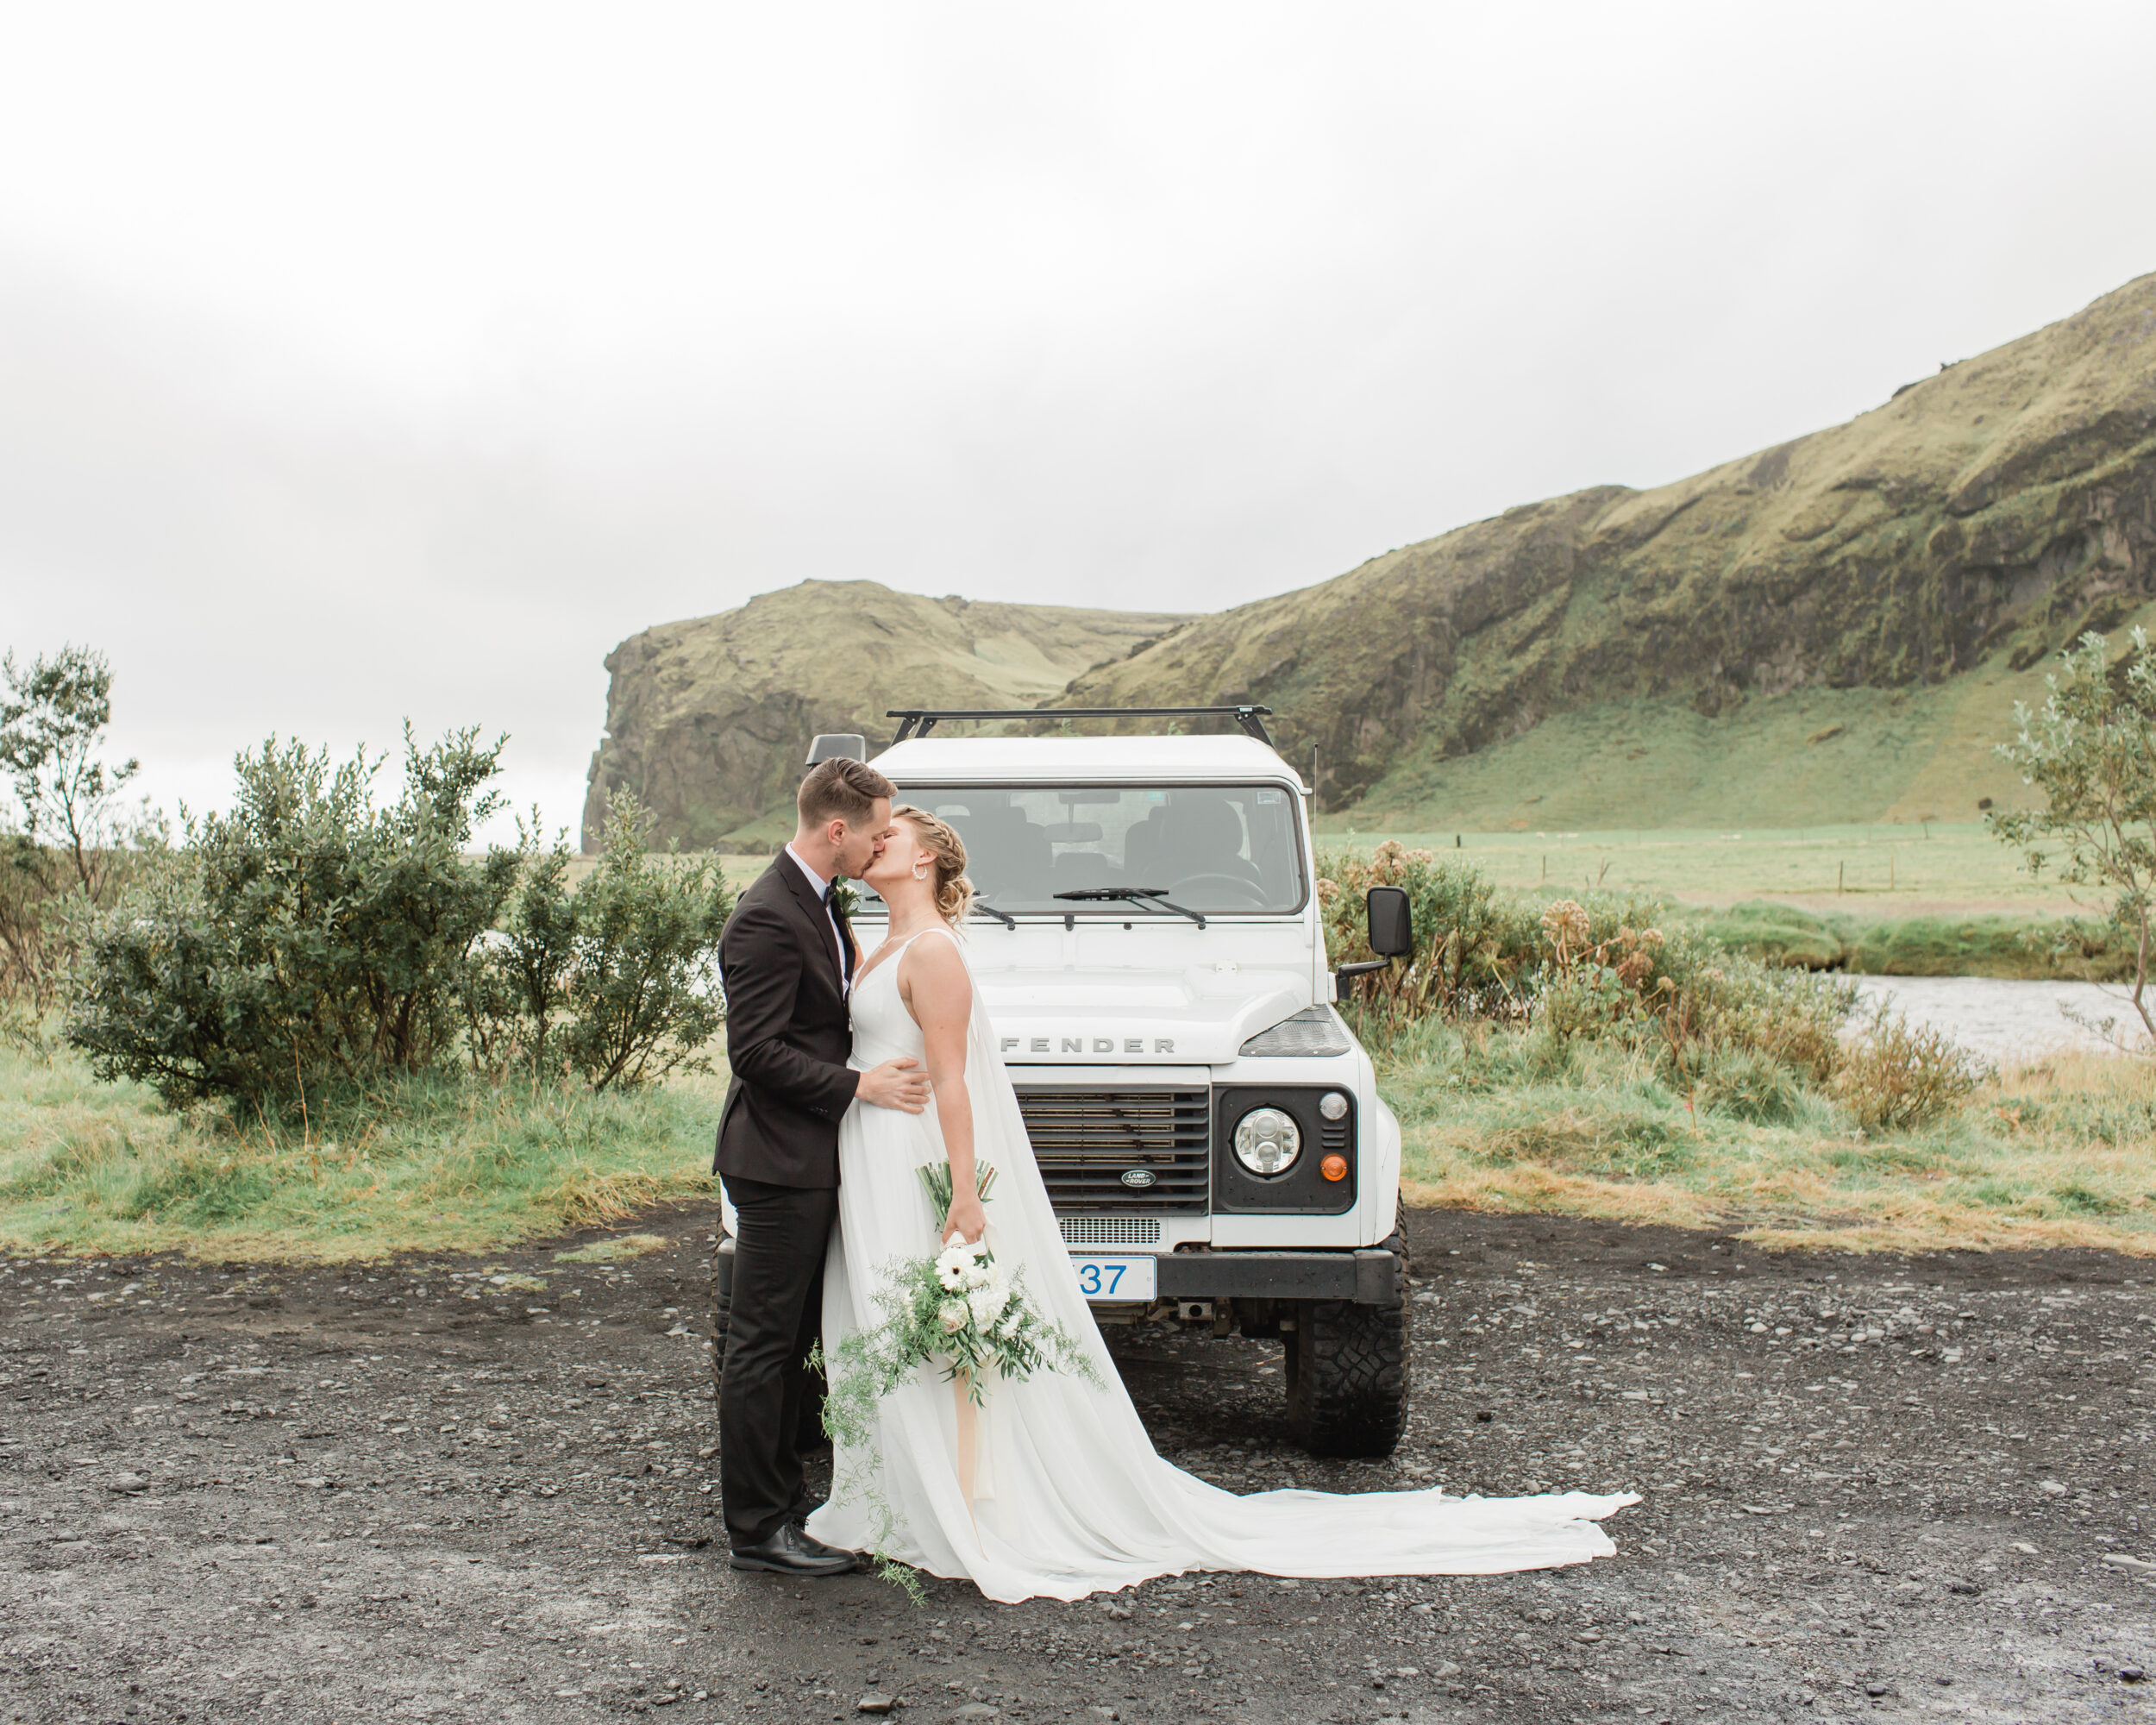 A couple kisses in front of a Defender during their Skogafoss wedding ceremony. 